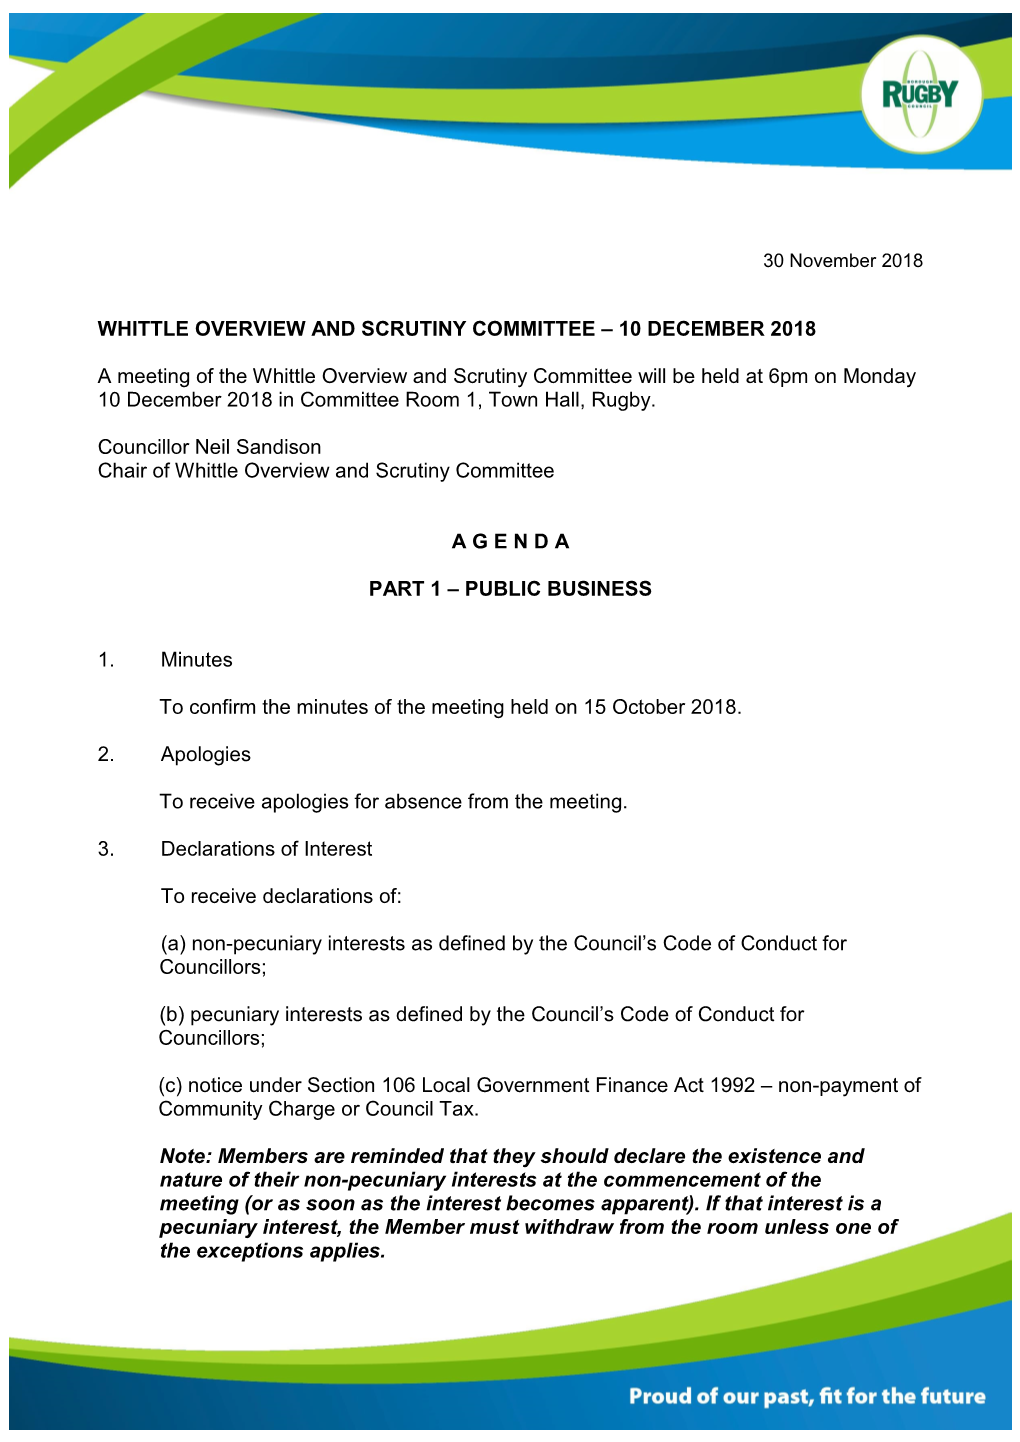 Whittle Overview and Scrutiny Committee Agenda 10 December